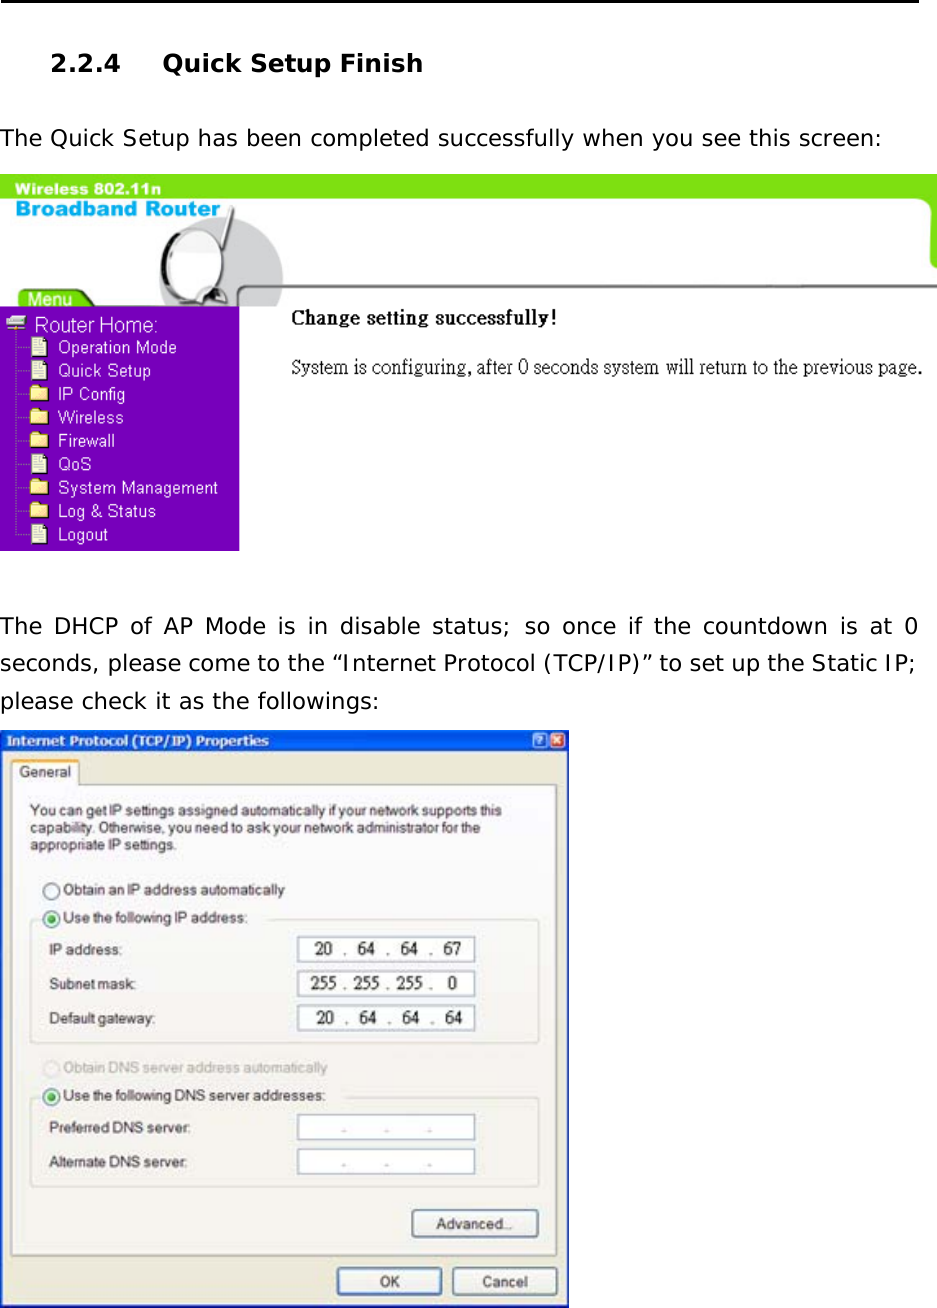  2.2.4  Quick Setup Finish  The Quick Setup has been completed successfully when you see this screen:   The DHCP of AP Mode is in disable status; so once if the countdown is at 0 seconds, please come to the “Internet Protocol (TCP/IP)” to set up the Static IP; please check it as the followings:     